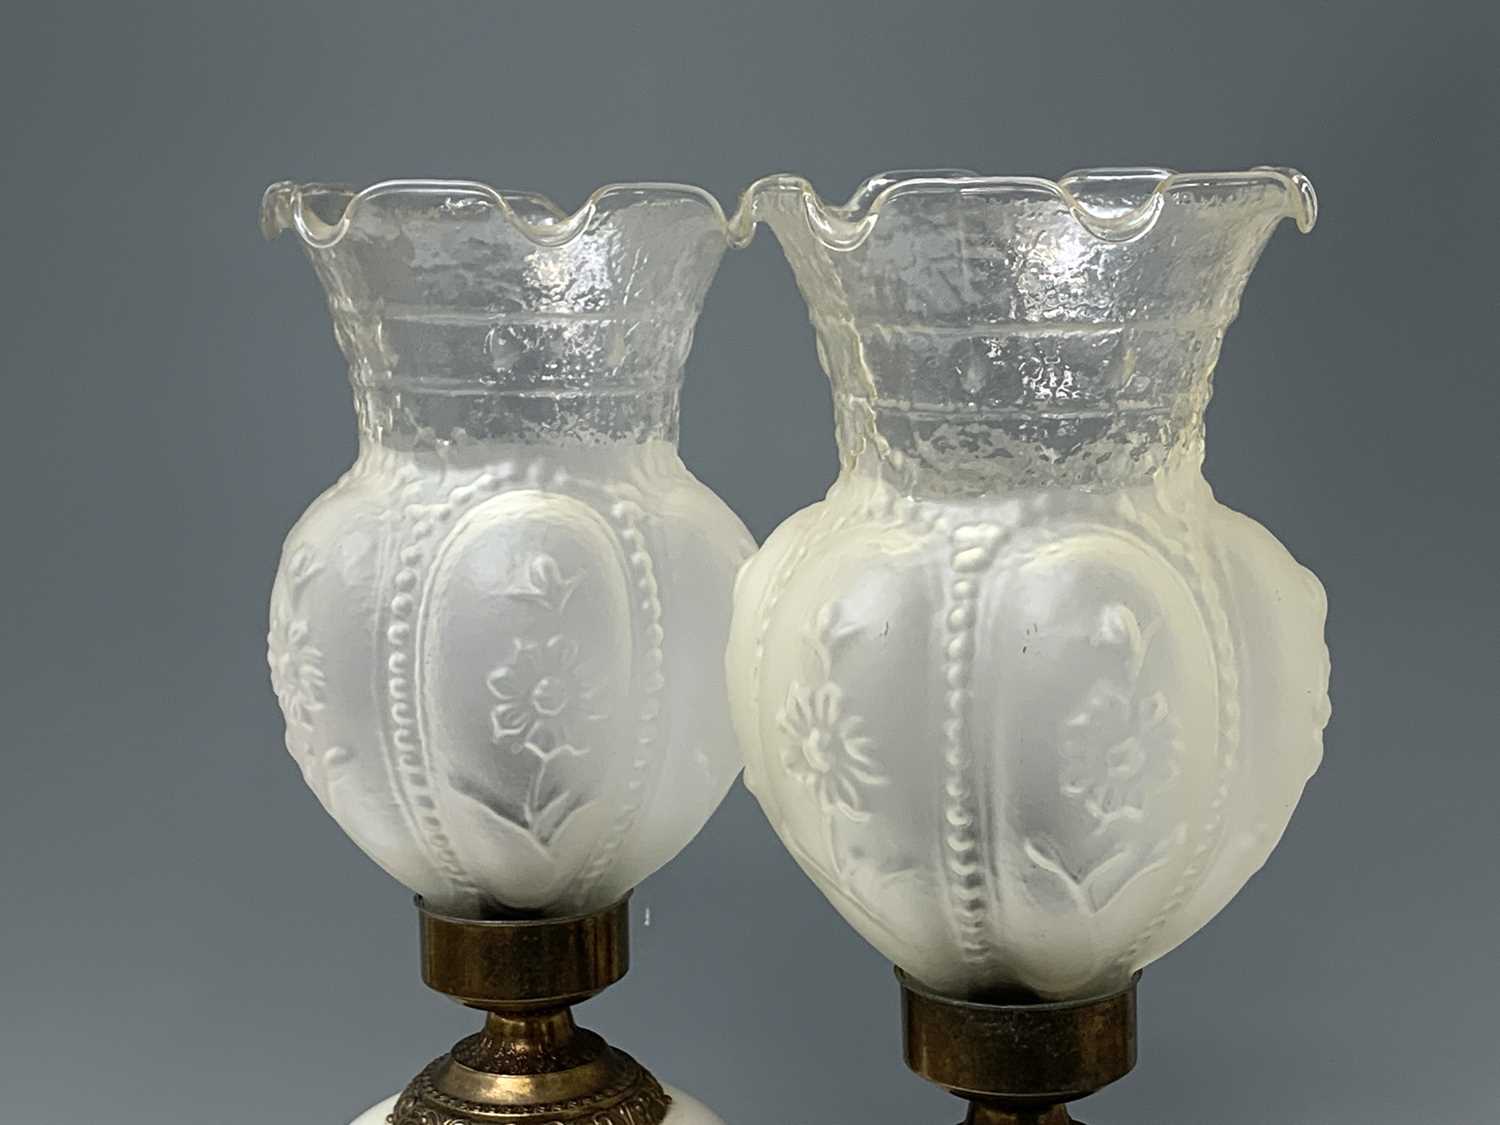 A pair of 20th century gilt metal mounted Delft table lamps with glass shades. Height 60.5cm. - Image 5 of 11